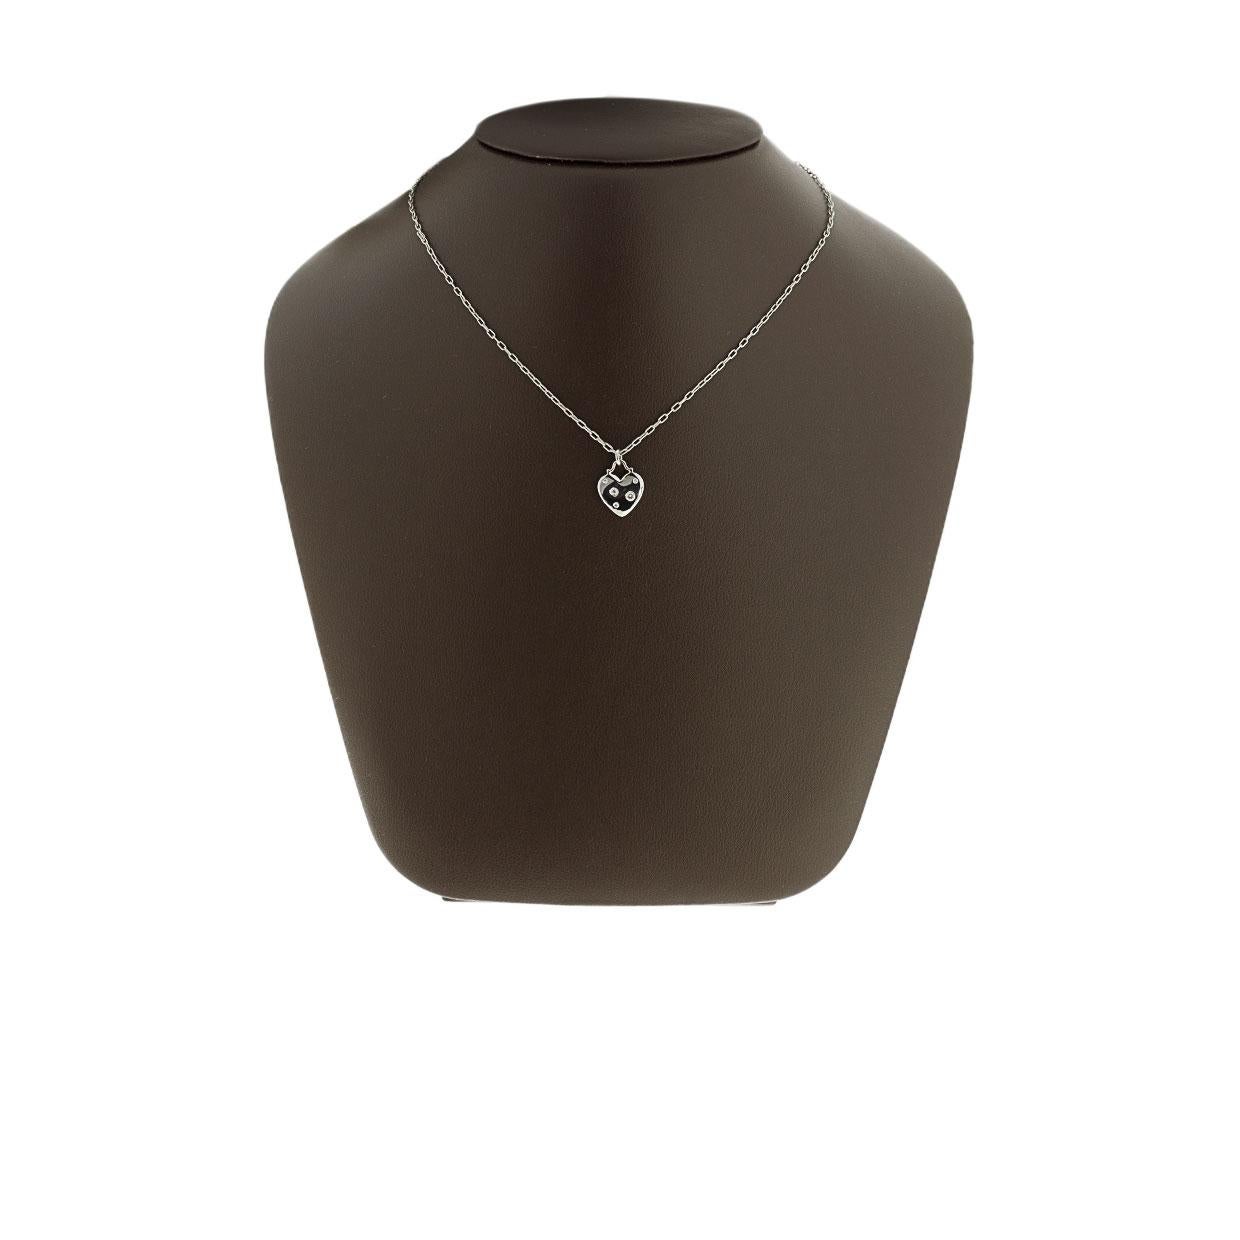 Item Details:
Estimated Retail - $1,500.00
Brand - Tiffany & Co
Collection - Etoile
Metal - 18 Karat White Gold
Total Carat Weight (TCW) - 0.08 ctw
Style - Heart Pendant
Fastening - Lobster Clasp
Length (inches) - 16.00 in
Pendant L x W - 15 X 12